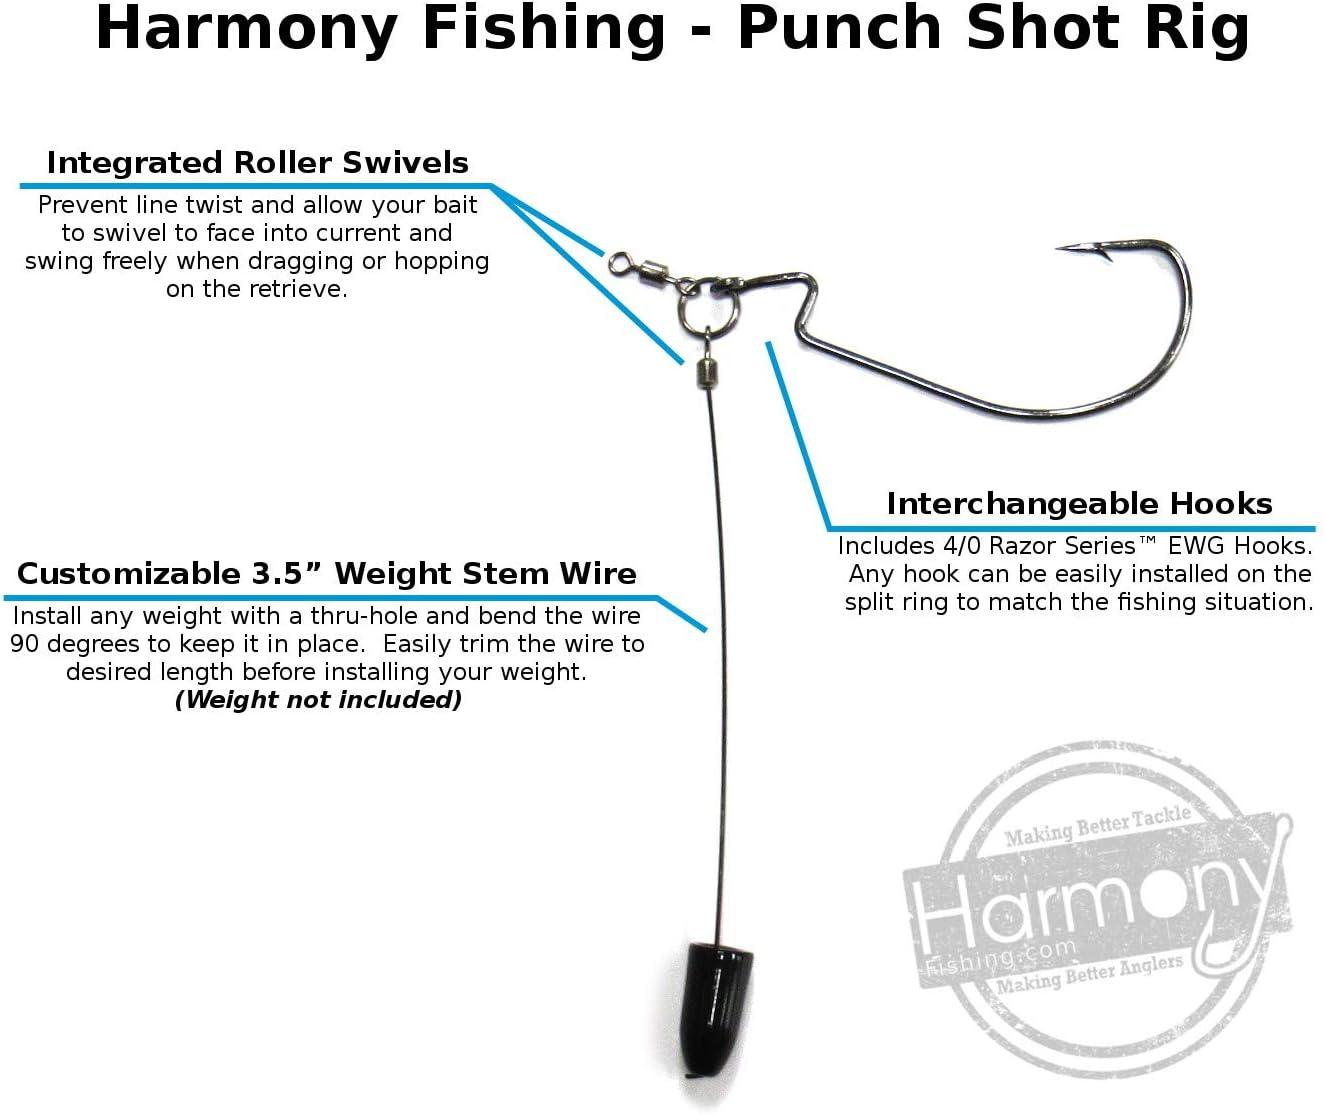 How to Dropshot for Bass - What, Where, and How - Harmony Fishing Company